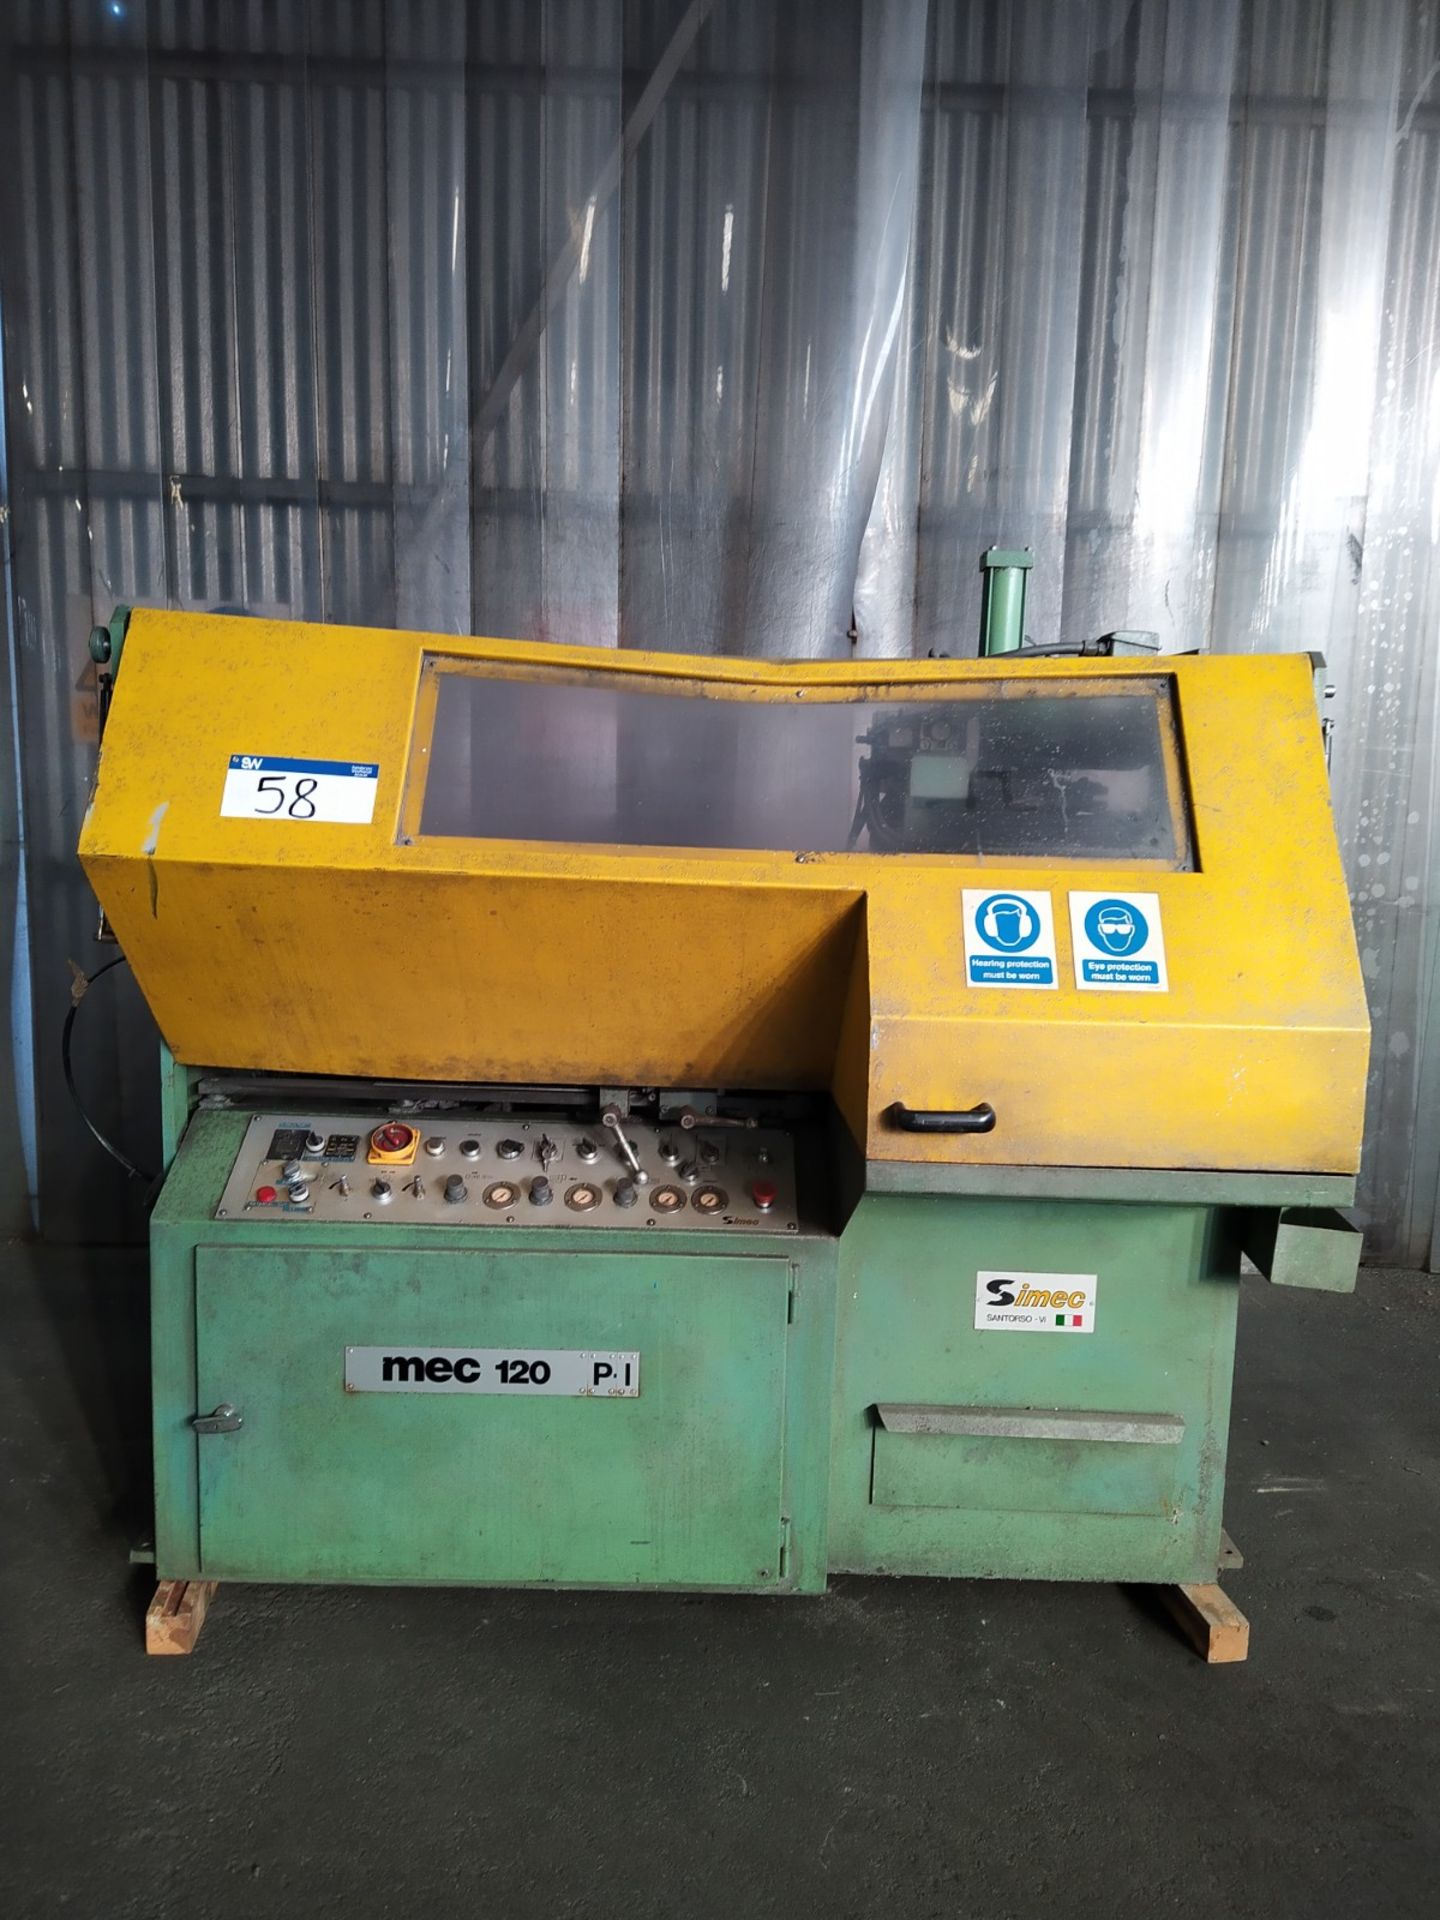 Simec SRL ME 120 Circular Auto Saw, year of manufacture 1990, free loading onto purchasers transport - Image 2 of 16